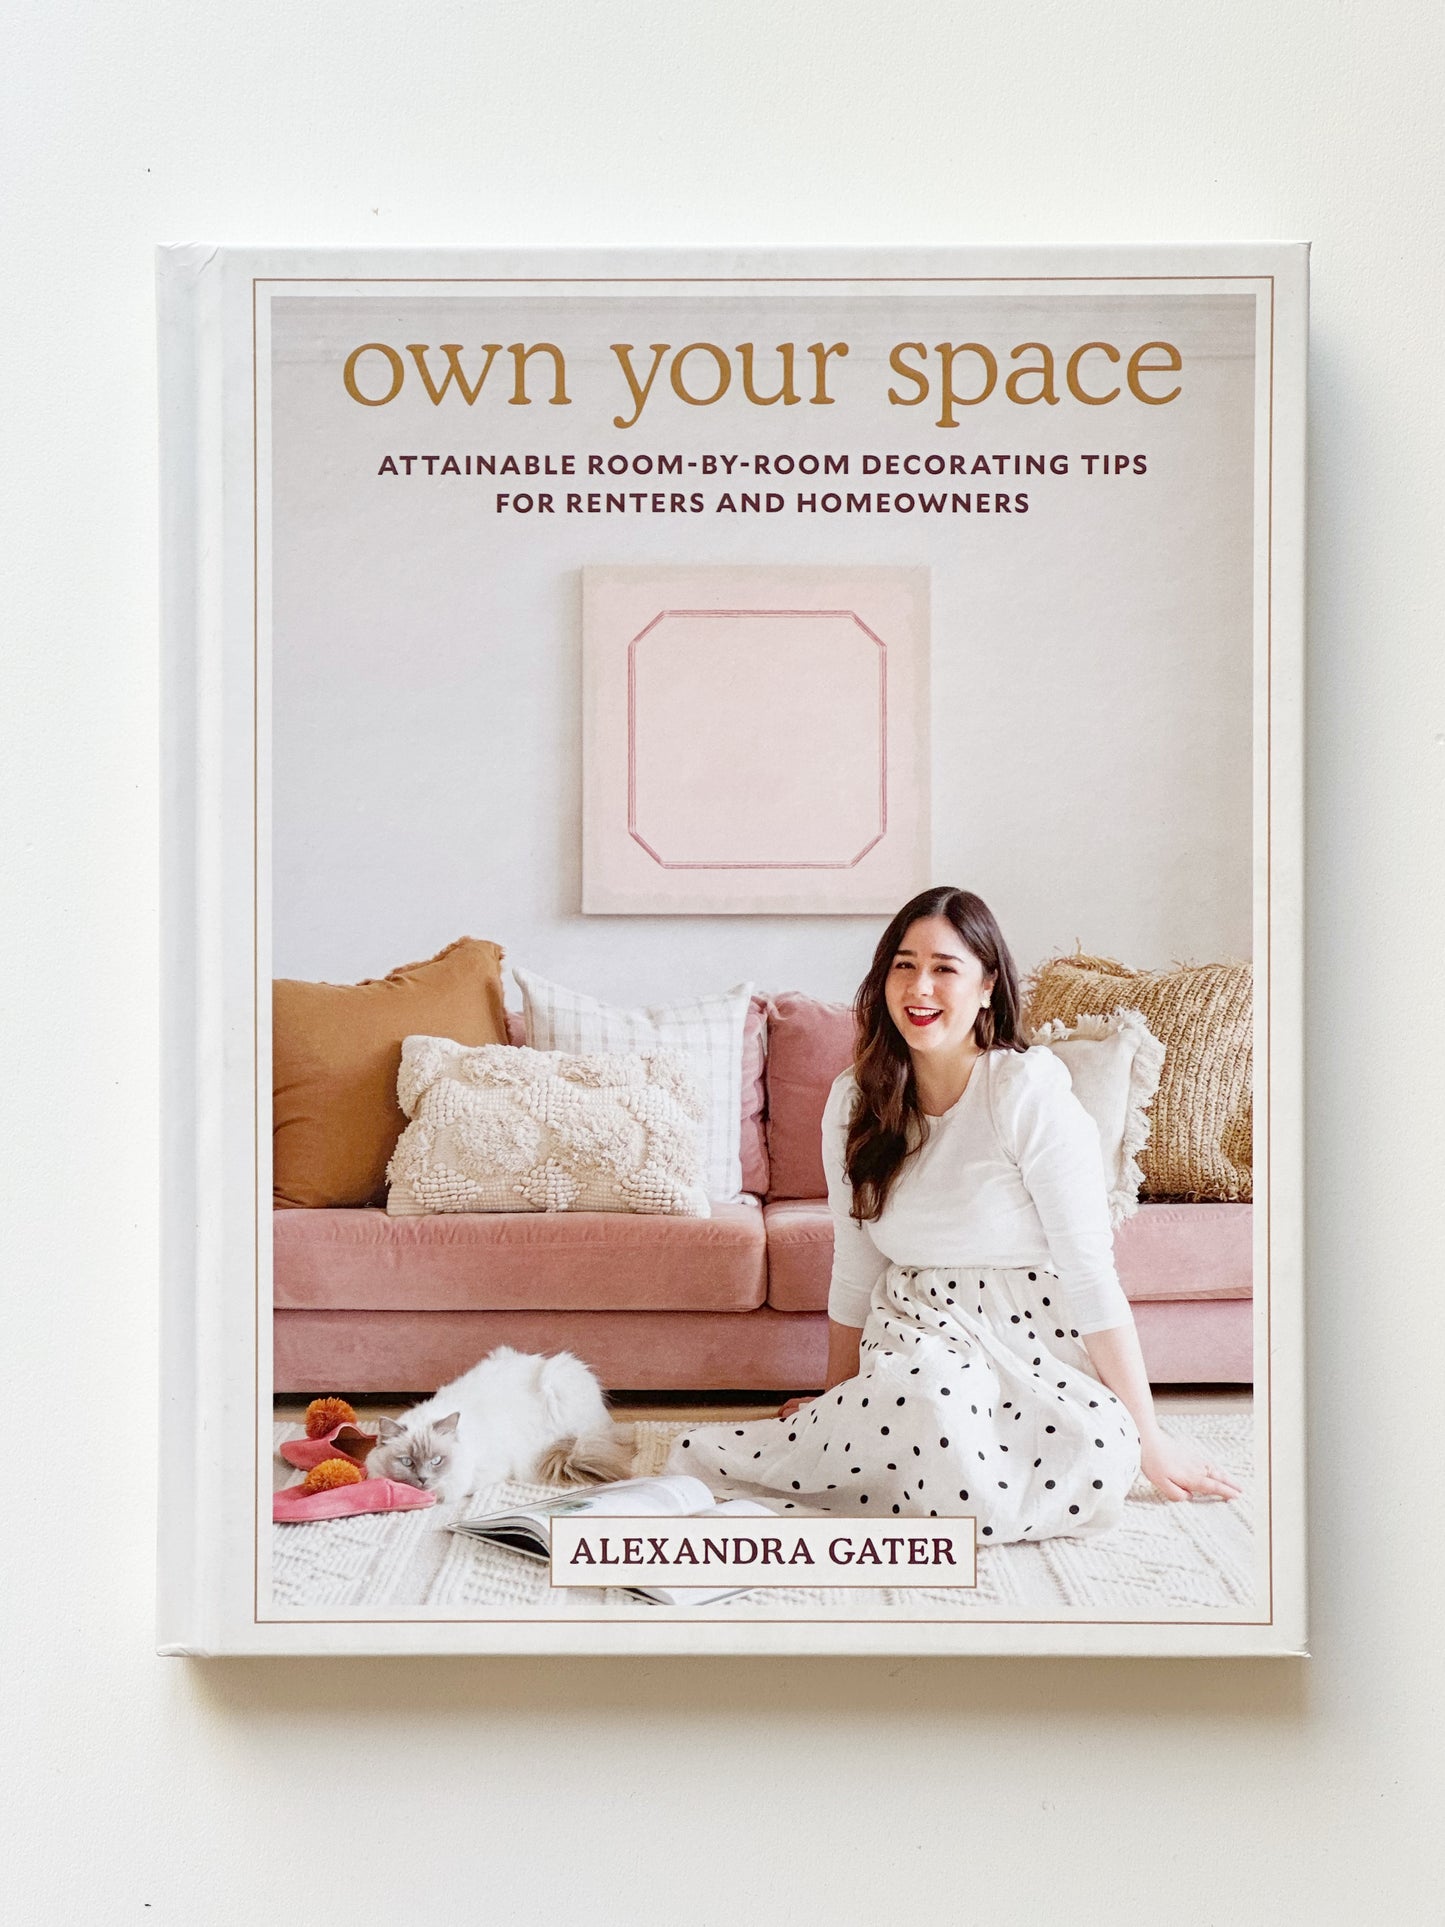 Own Your Space